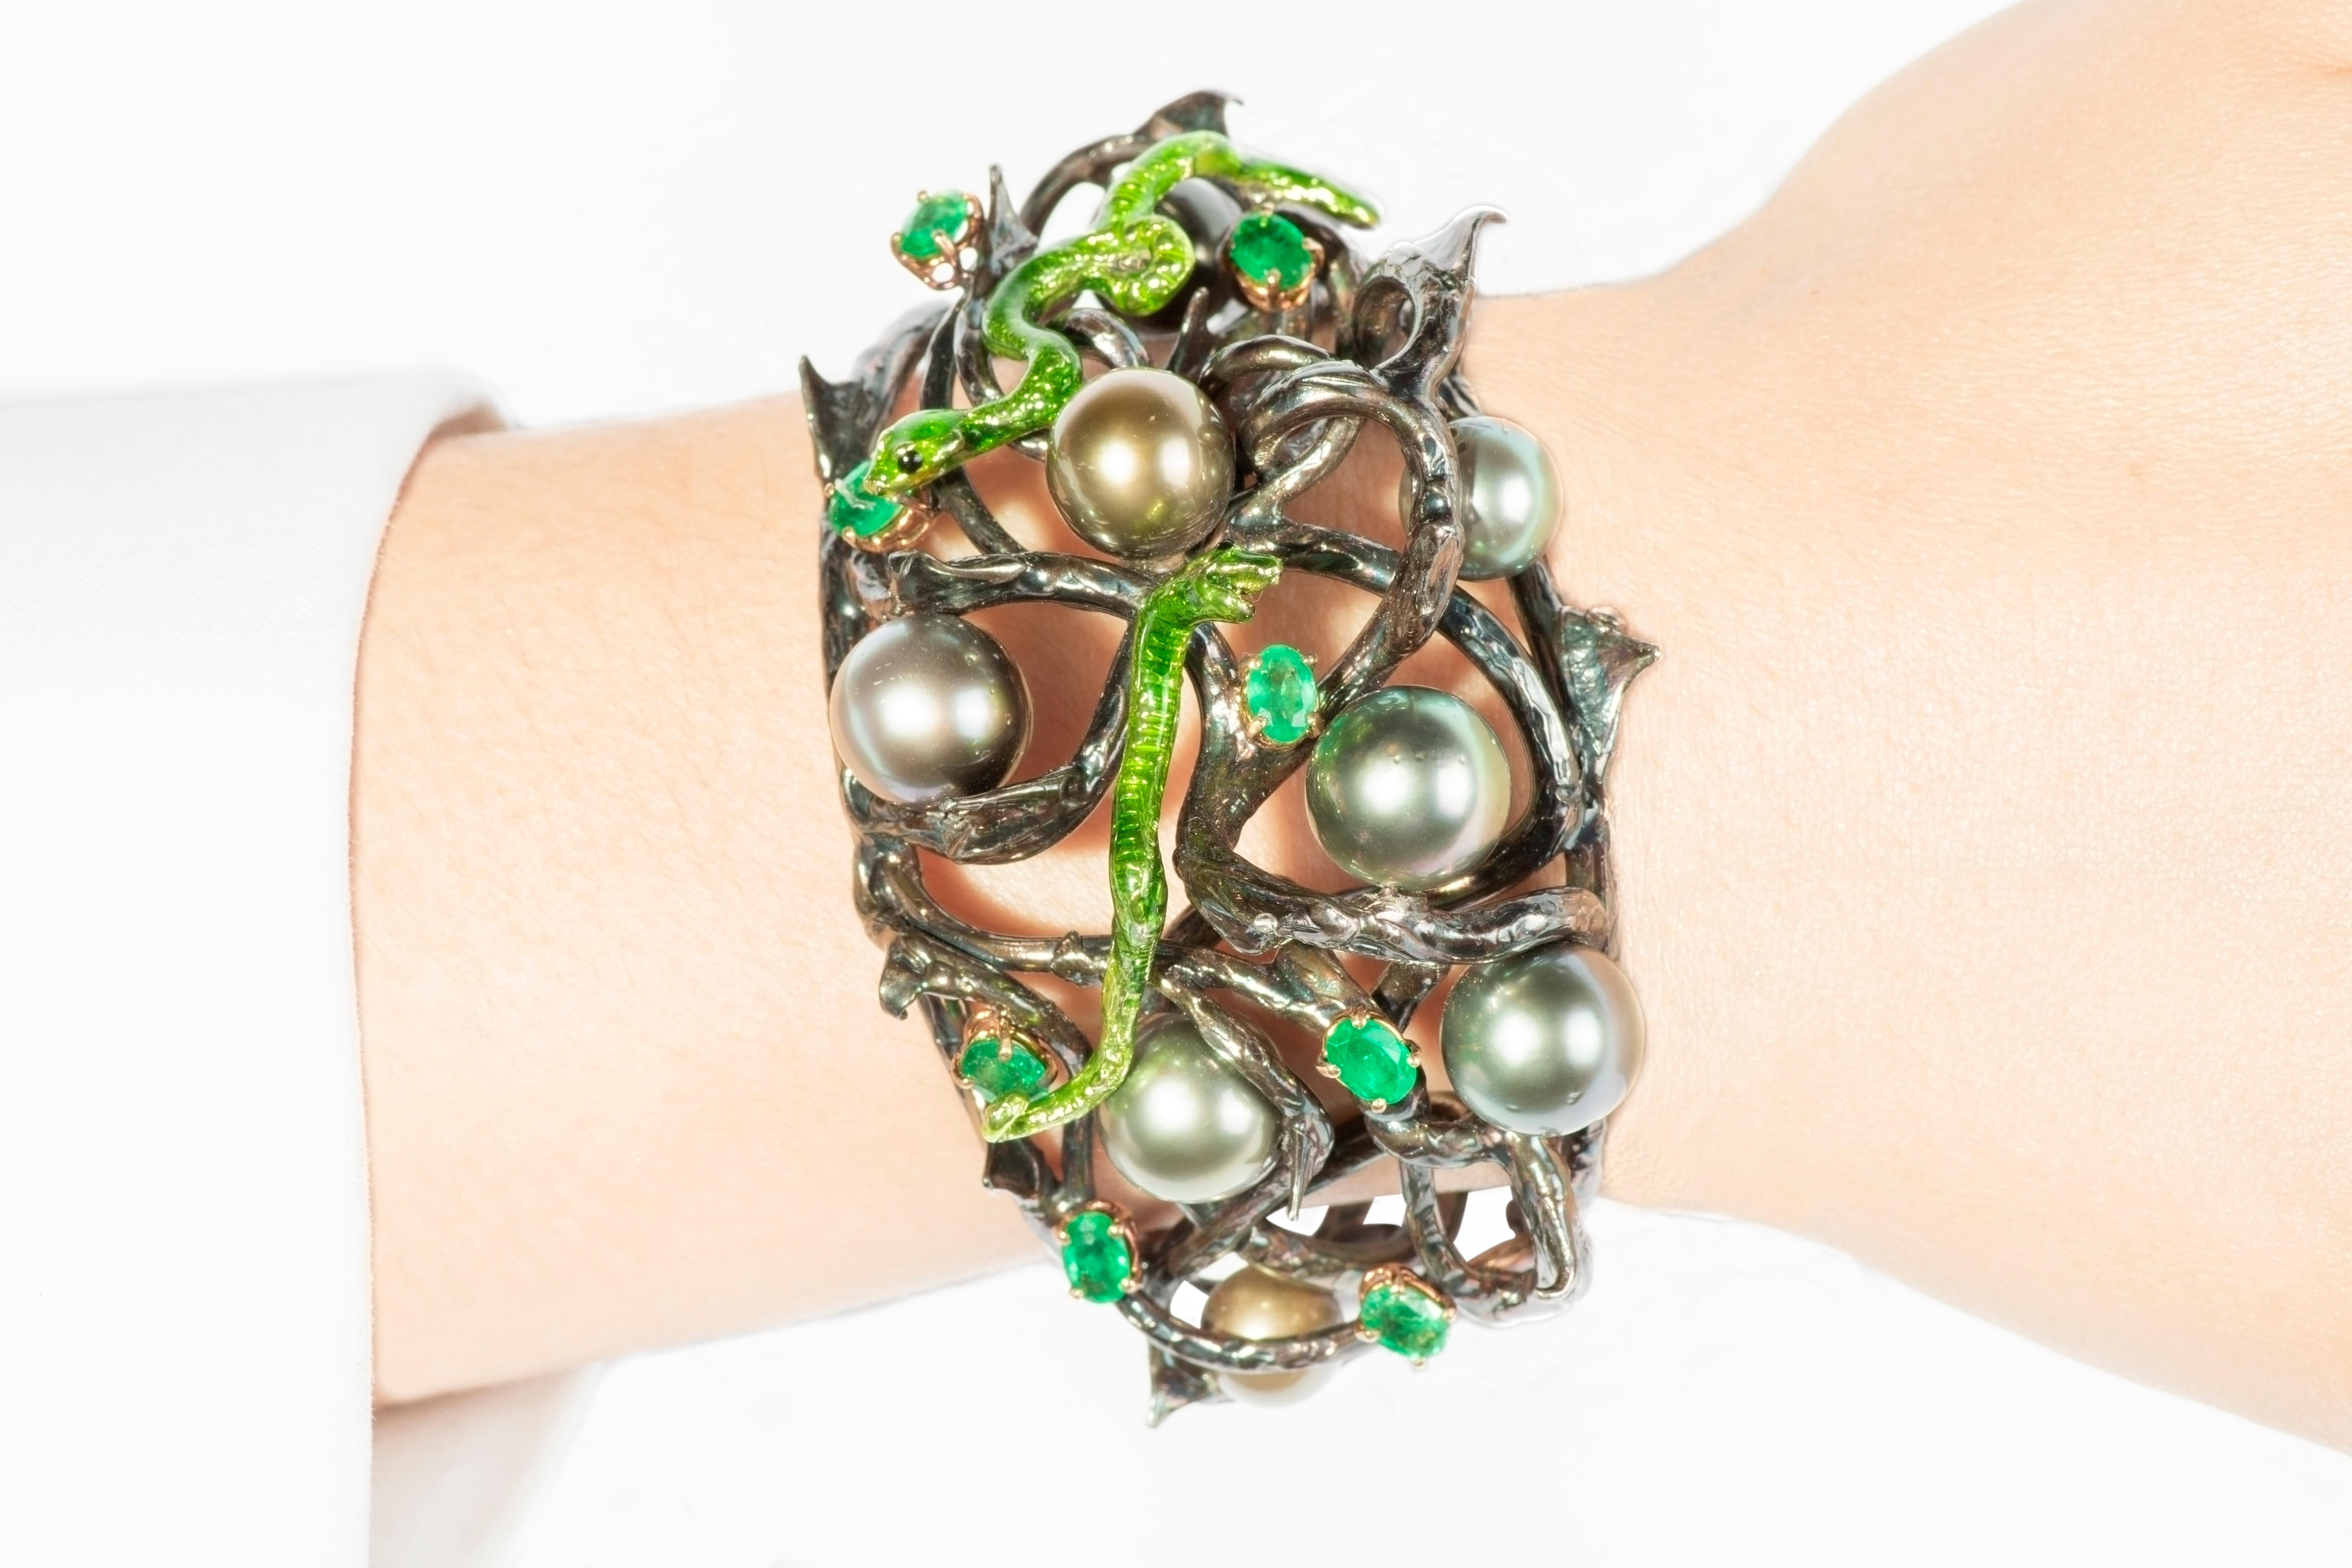 One of a kind piece from the 2007 Delfina Delettrez Original Sin collection. The figurative bracelet is handcrafted from 4,00 gr gold and 140,00 gr silver, finely embellished with snakes wrapped around 8 emeralds 3,00 ct and 9 Thaiti